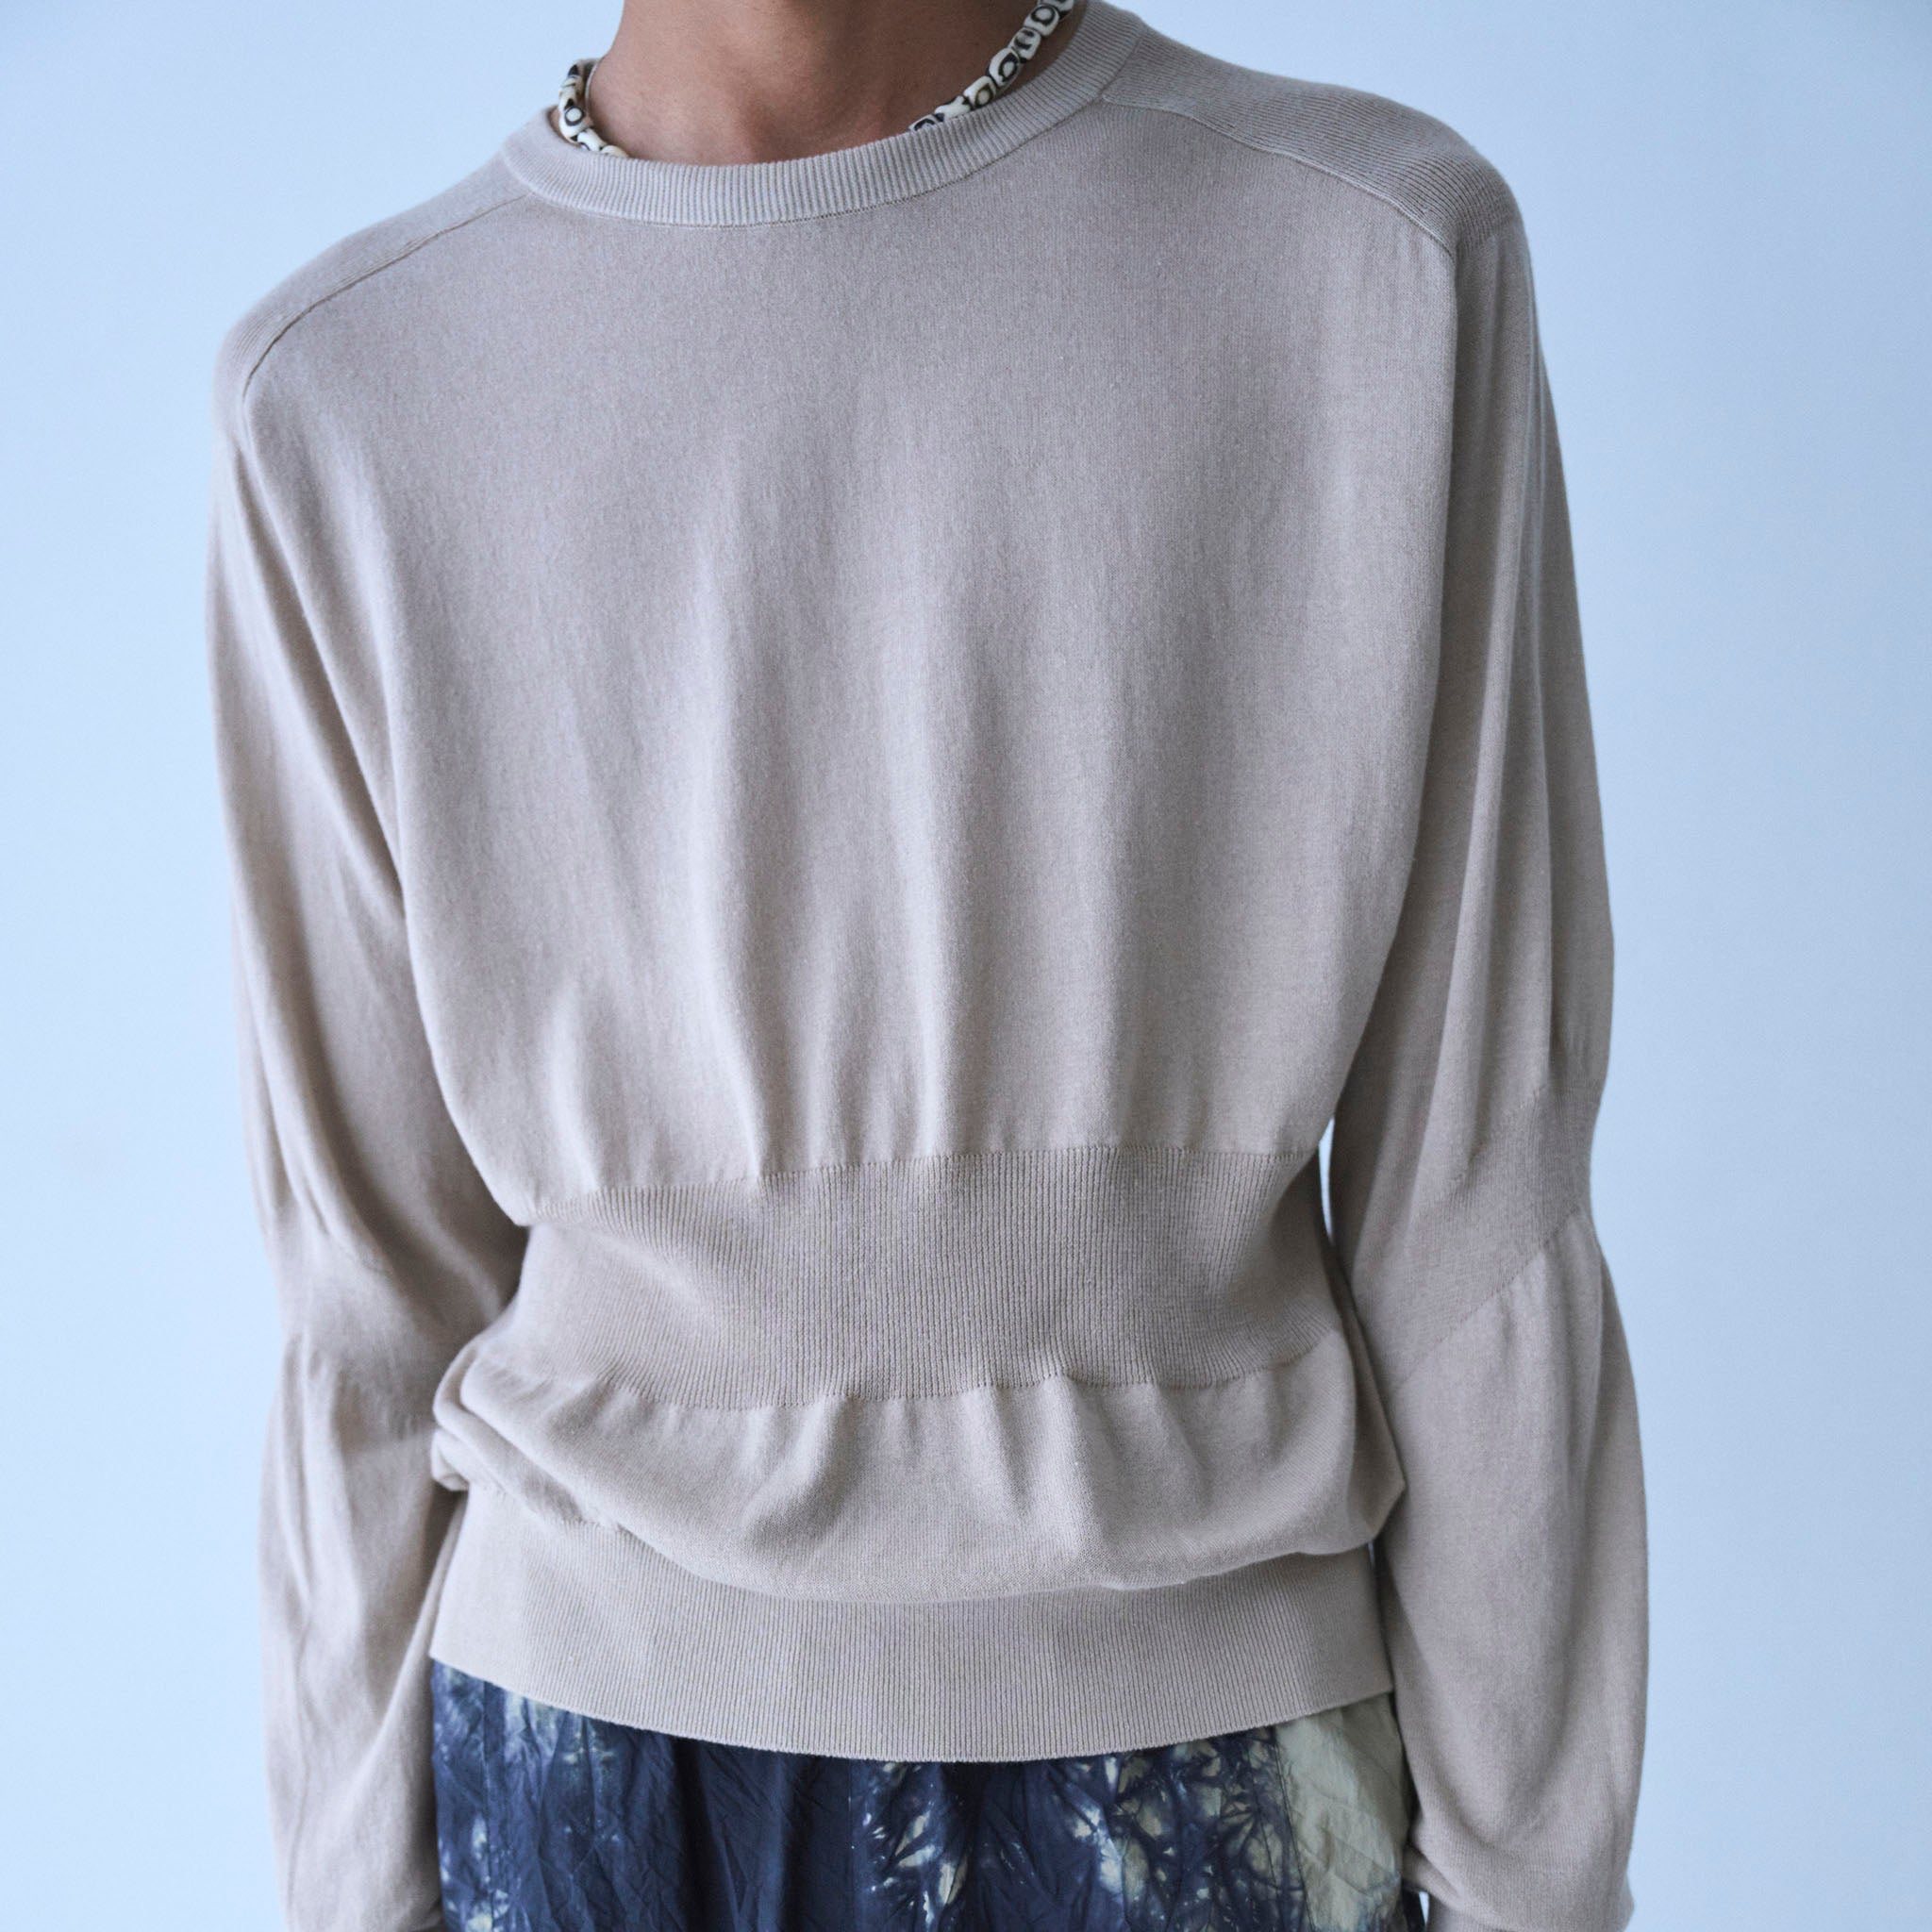 call "WAVE KNIT SWEATER"